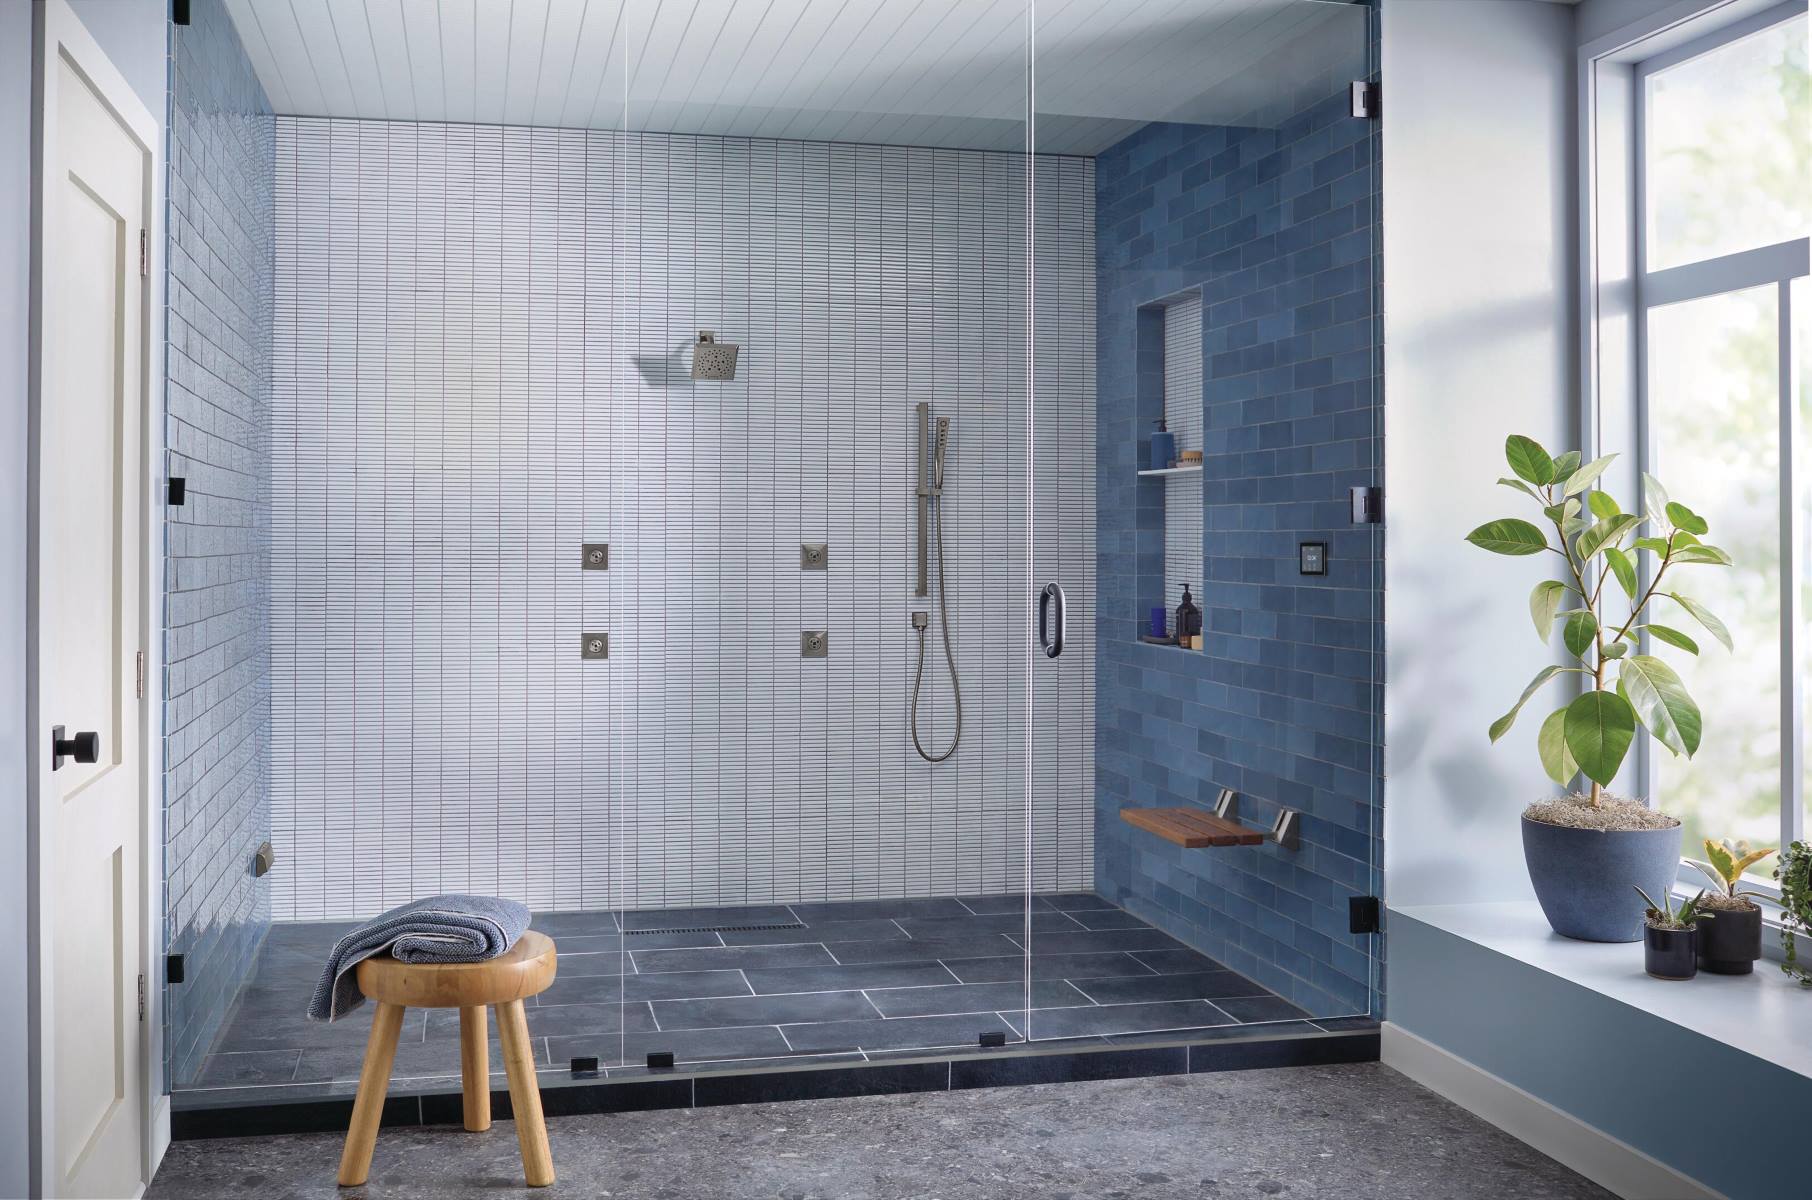 How Long Should You Sit In A Steam Shower When Sick